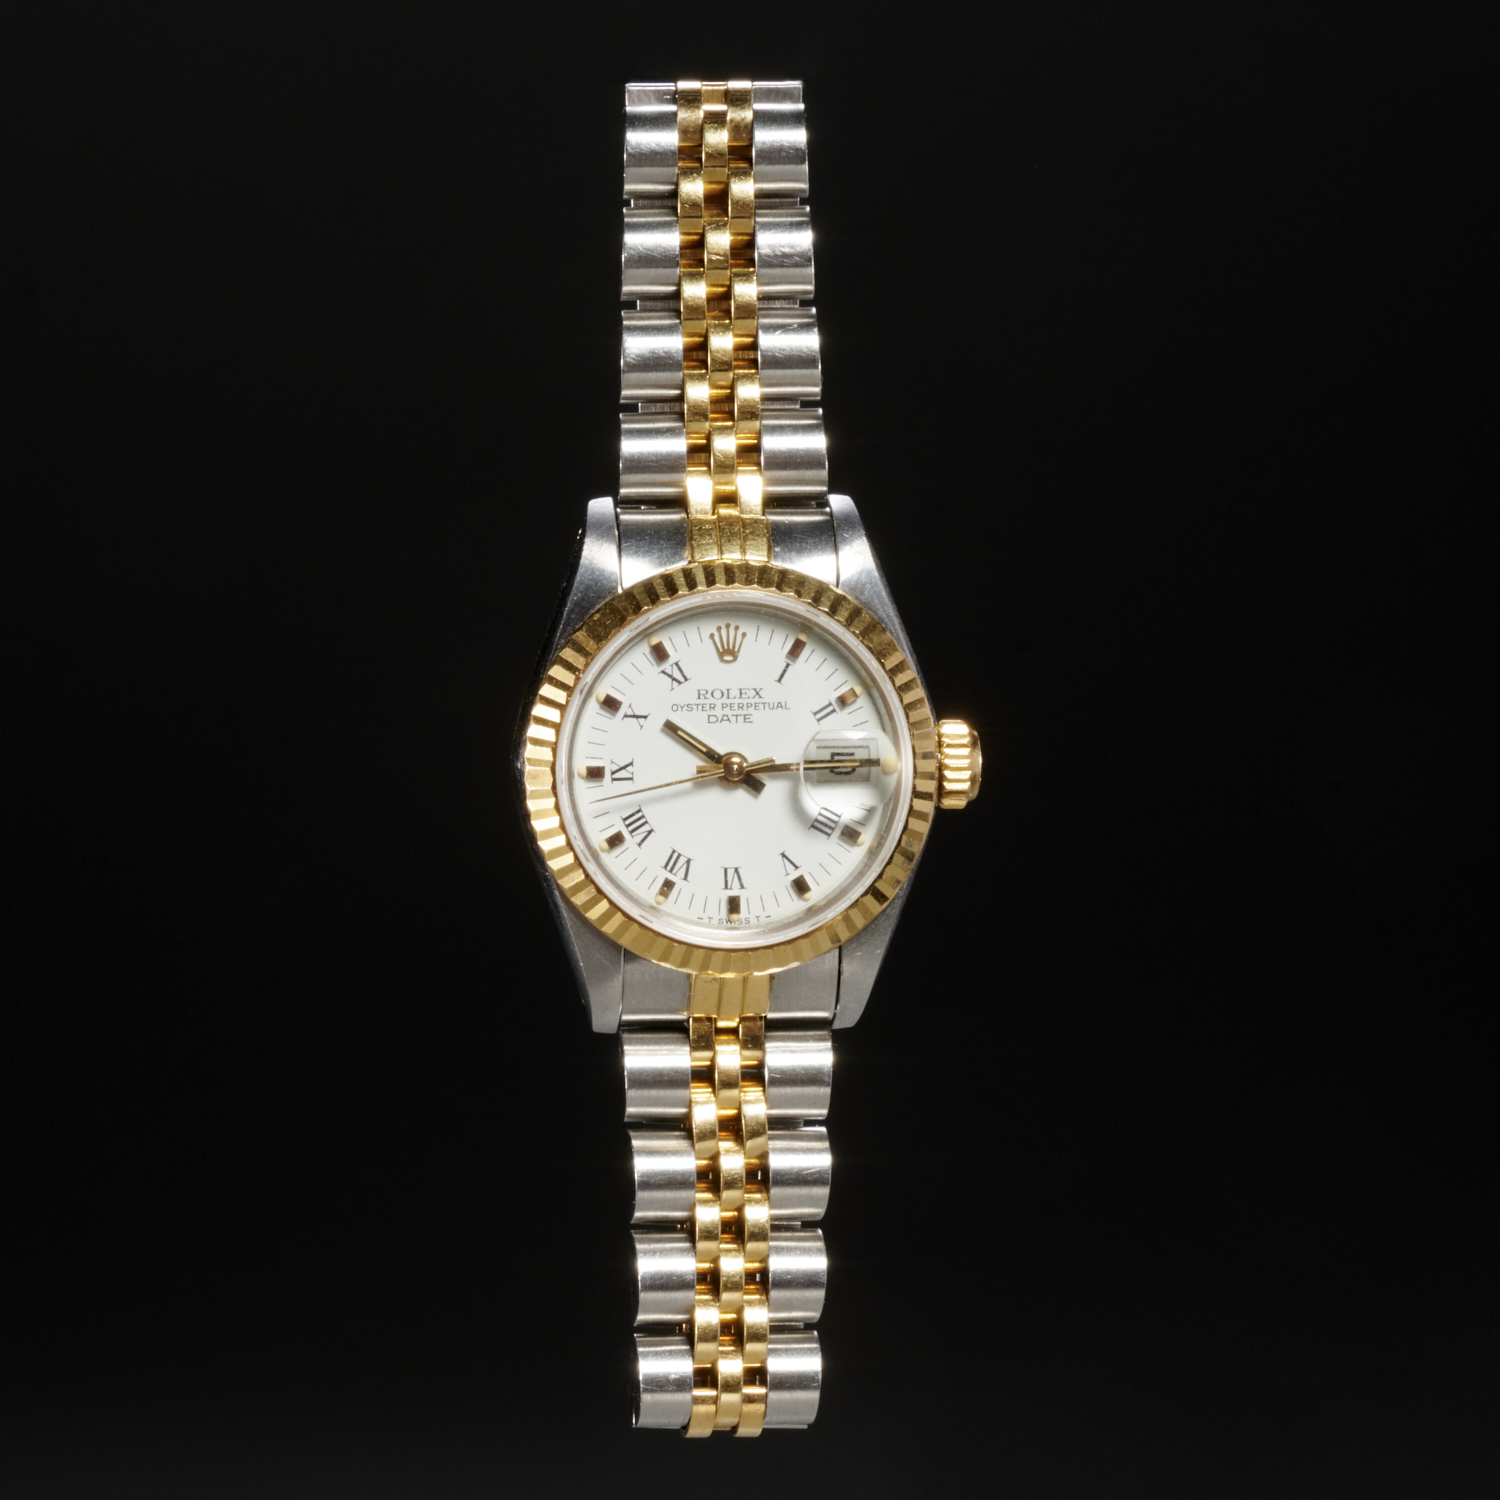 ROLEX LADIES OYSTER PERPETUAL WATCH 2fad81